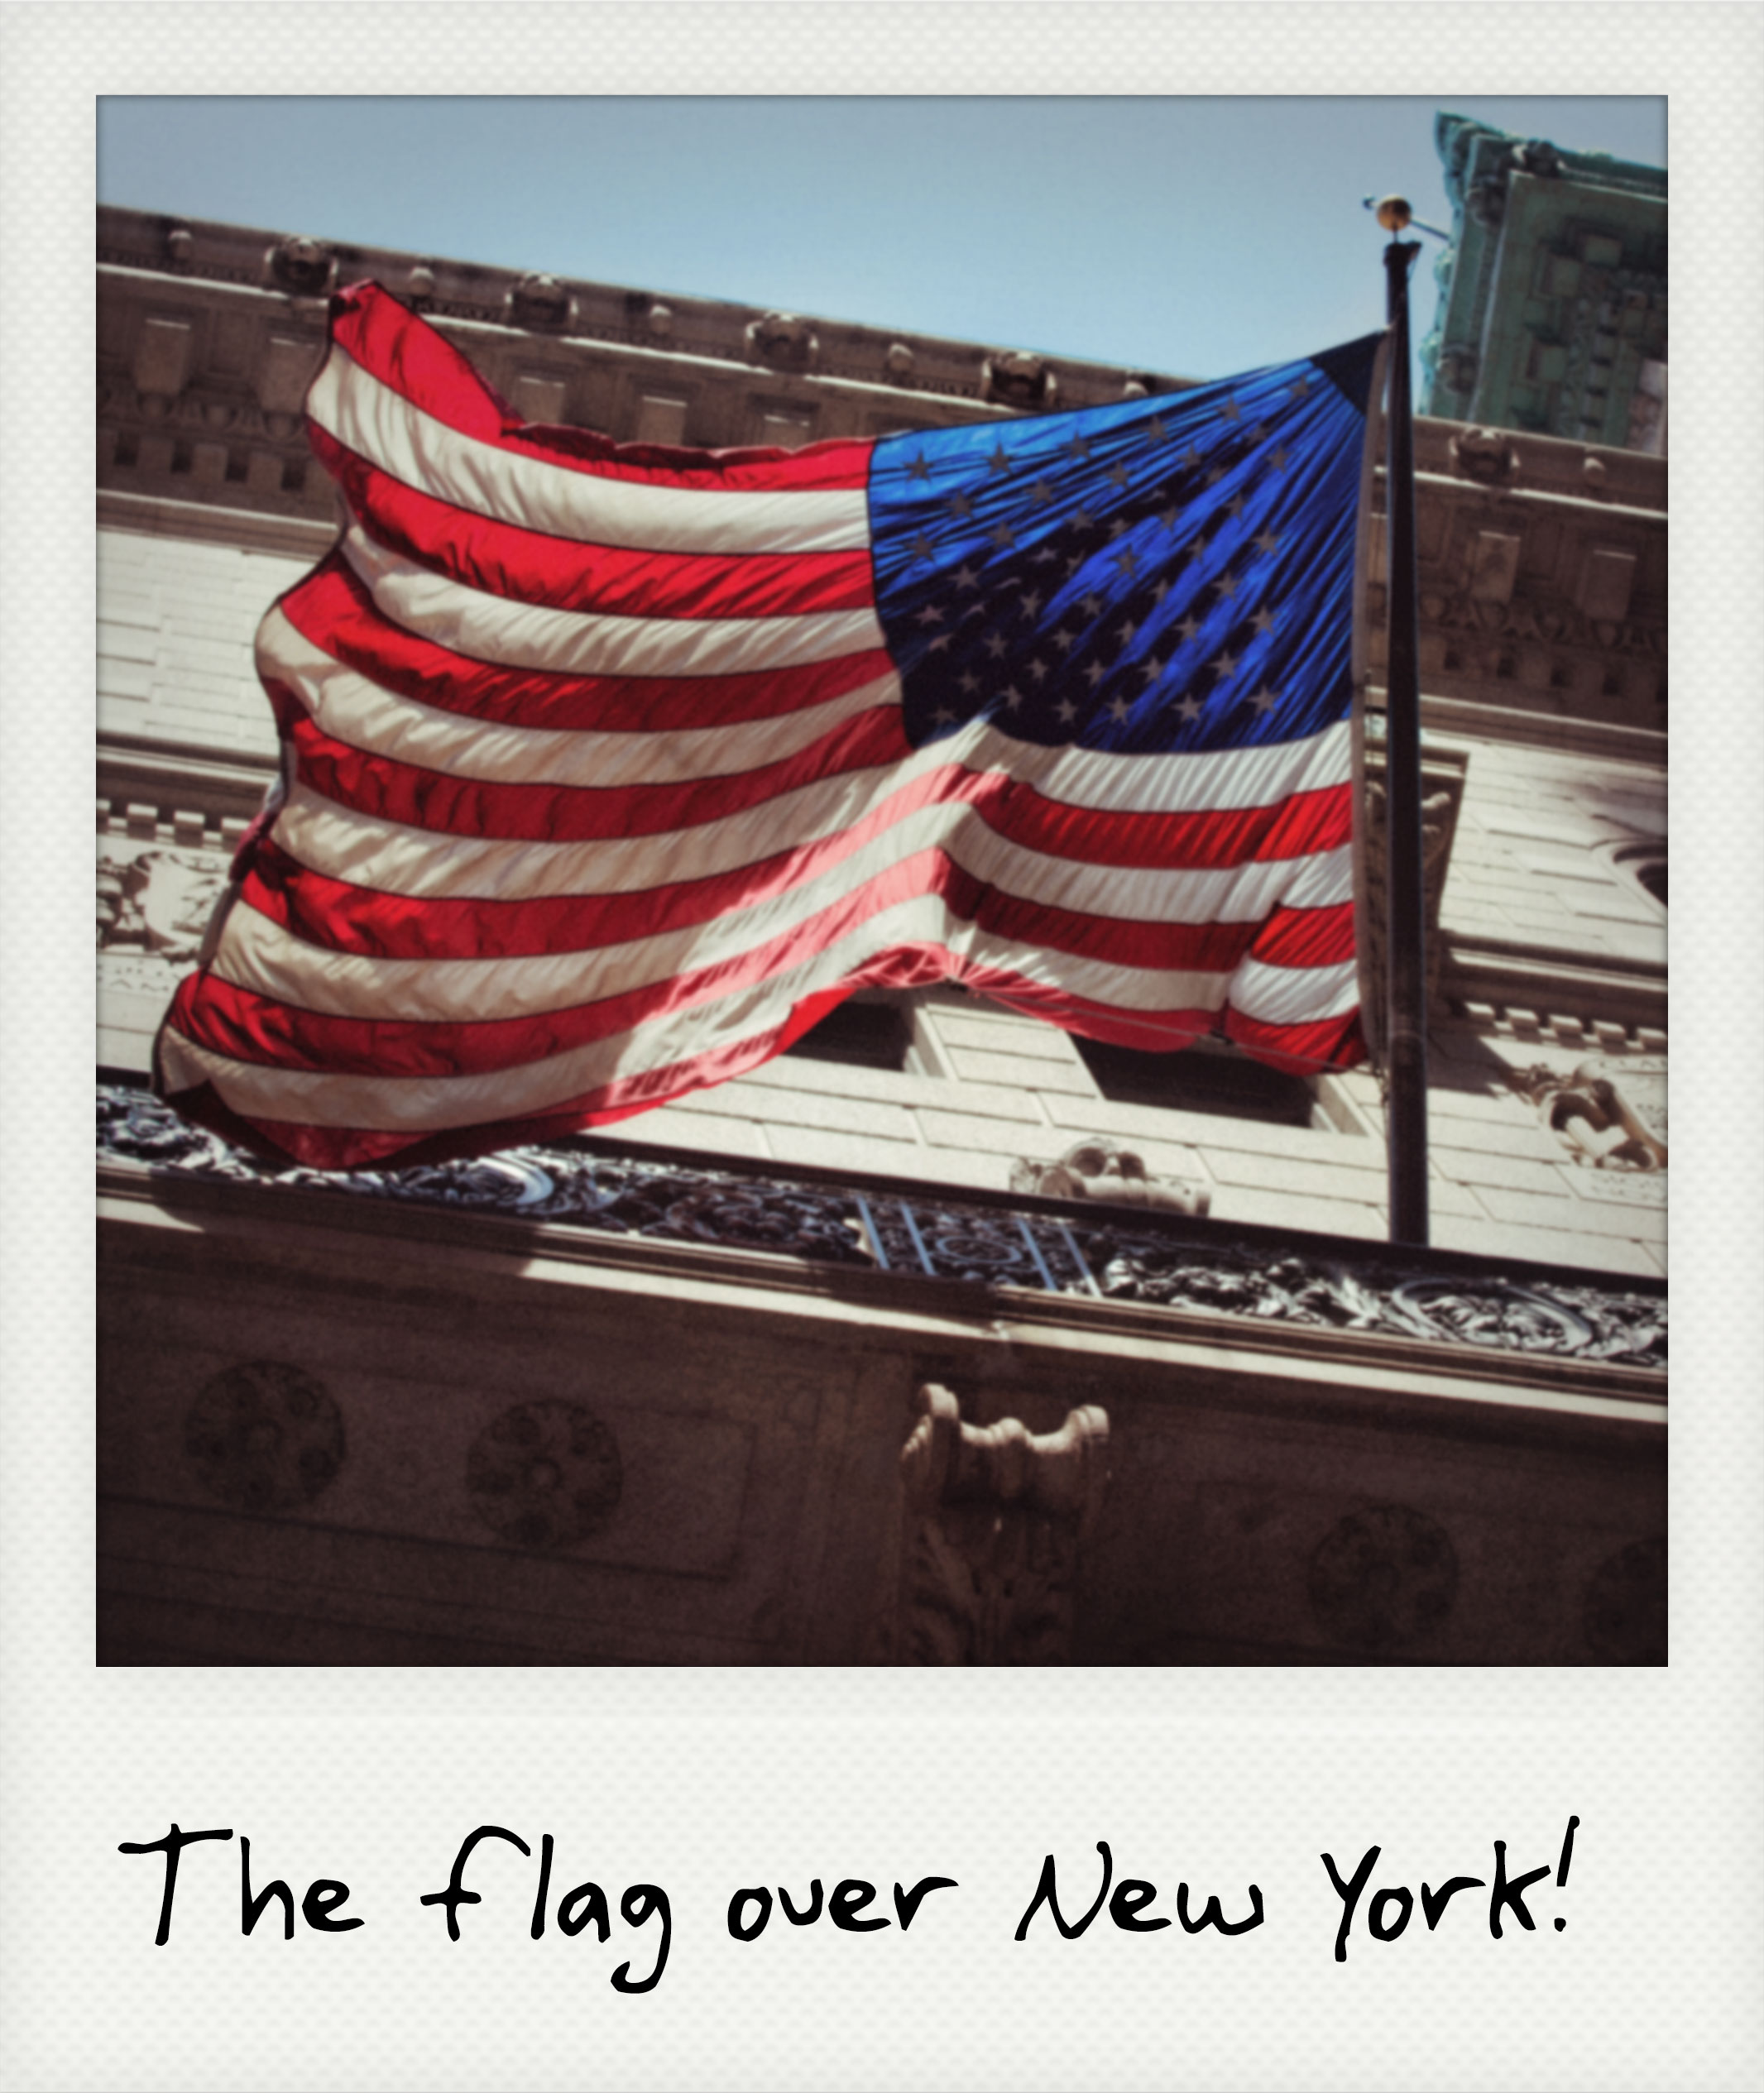 The flag over New York!